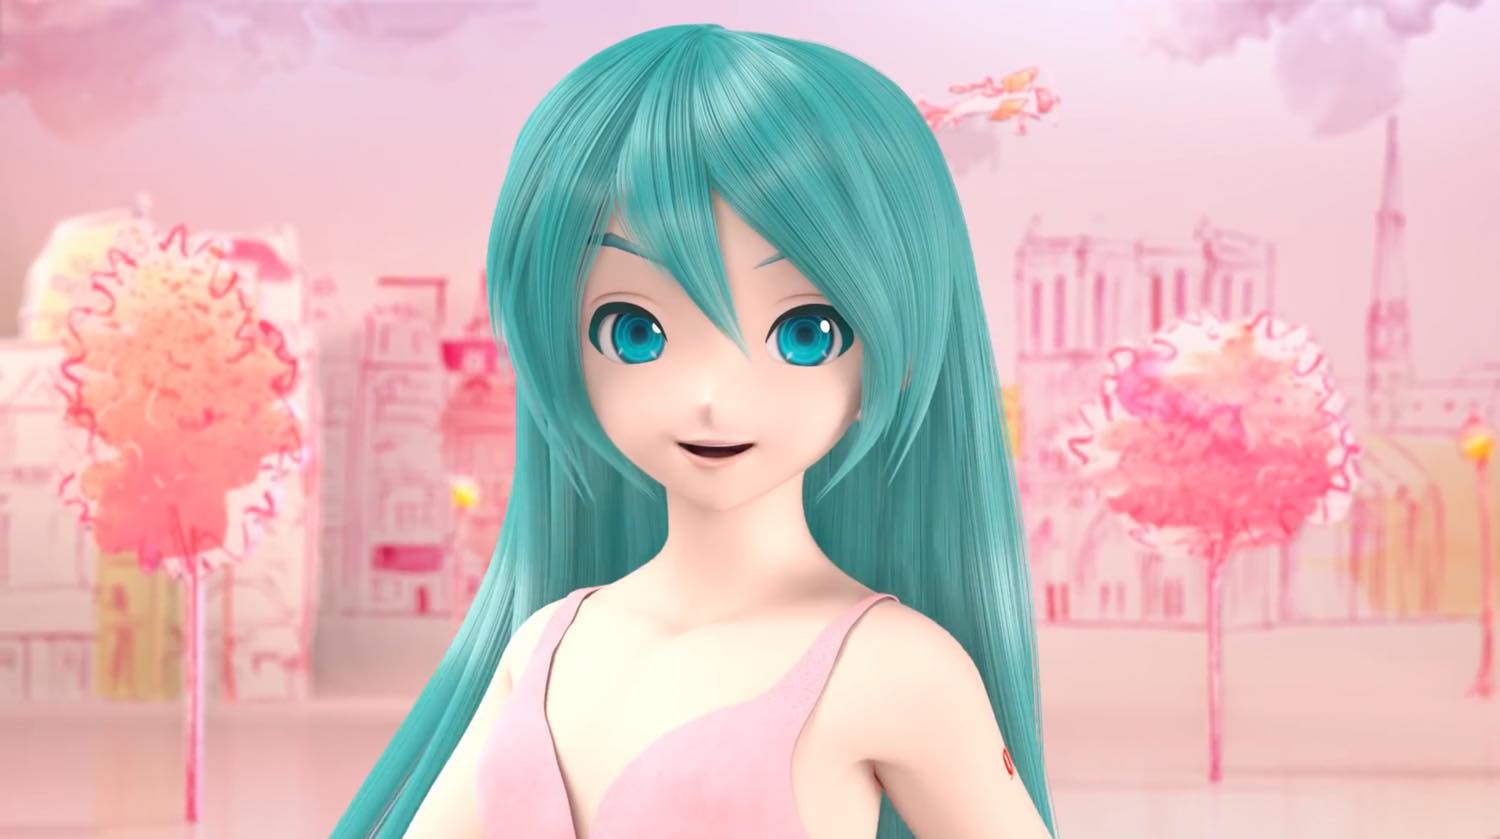 No More Twintails? Hatsune Miku Shows New Mature Look in Shampoo Commercial!